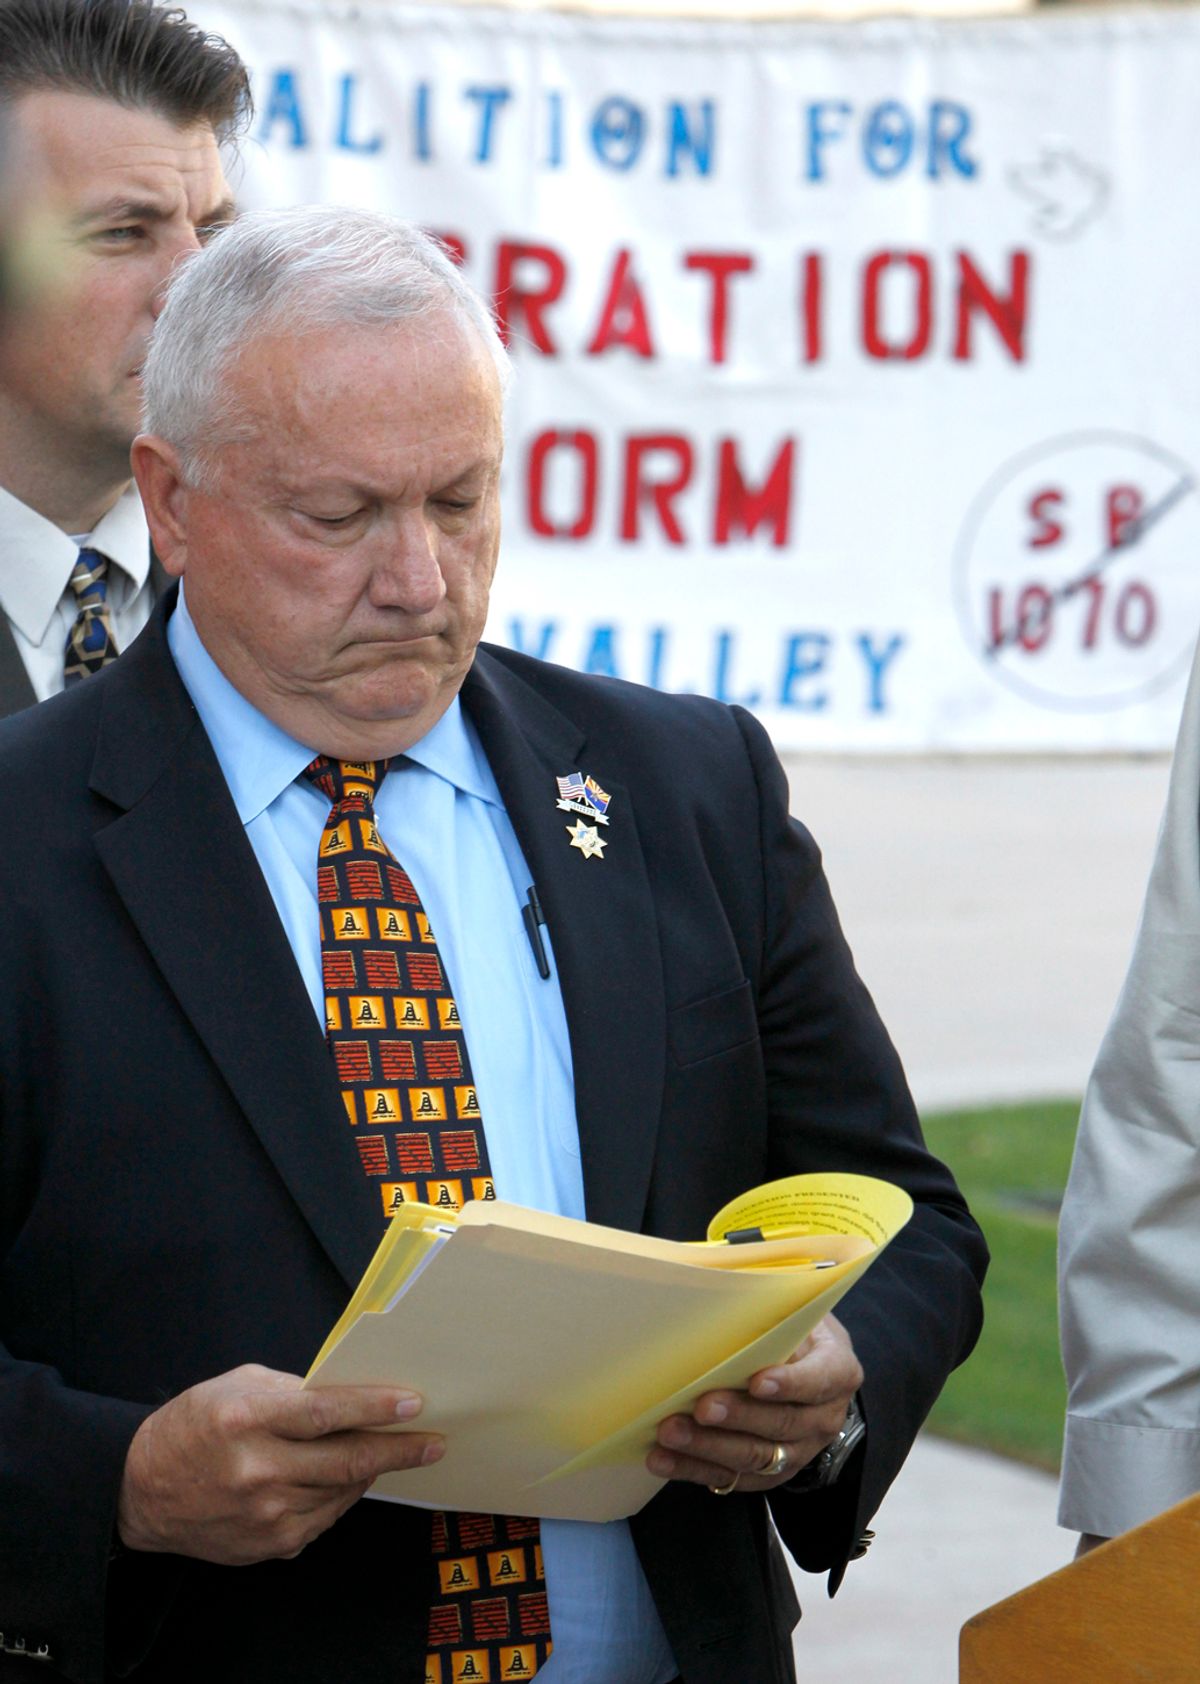 With protesters holding a sign in the background, Arizona state Sen. Russell Pearce, R-Mesa, checks notes before speaking at a news conference about efforts by state legislators to propose legislation to deny U.S. citizenship to children of illegal immigrants Tuesday, Oct. 19, 2010, in Phoenix.  The efforts by the state legislators come amid calls to change the U.S. Constitution's 14th Amendment, which grants automatic citizenship to U.S.-born children of illegal immigrants. (AP Photo/Ross D. Franklin)  (Ross D. Franklin)